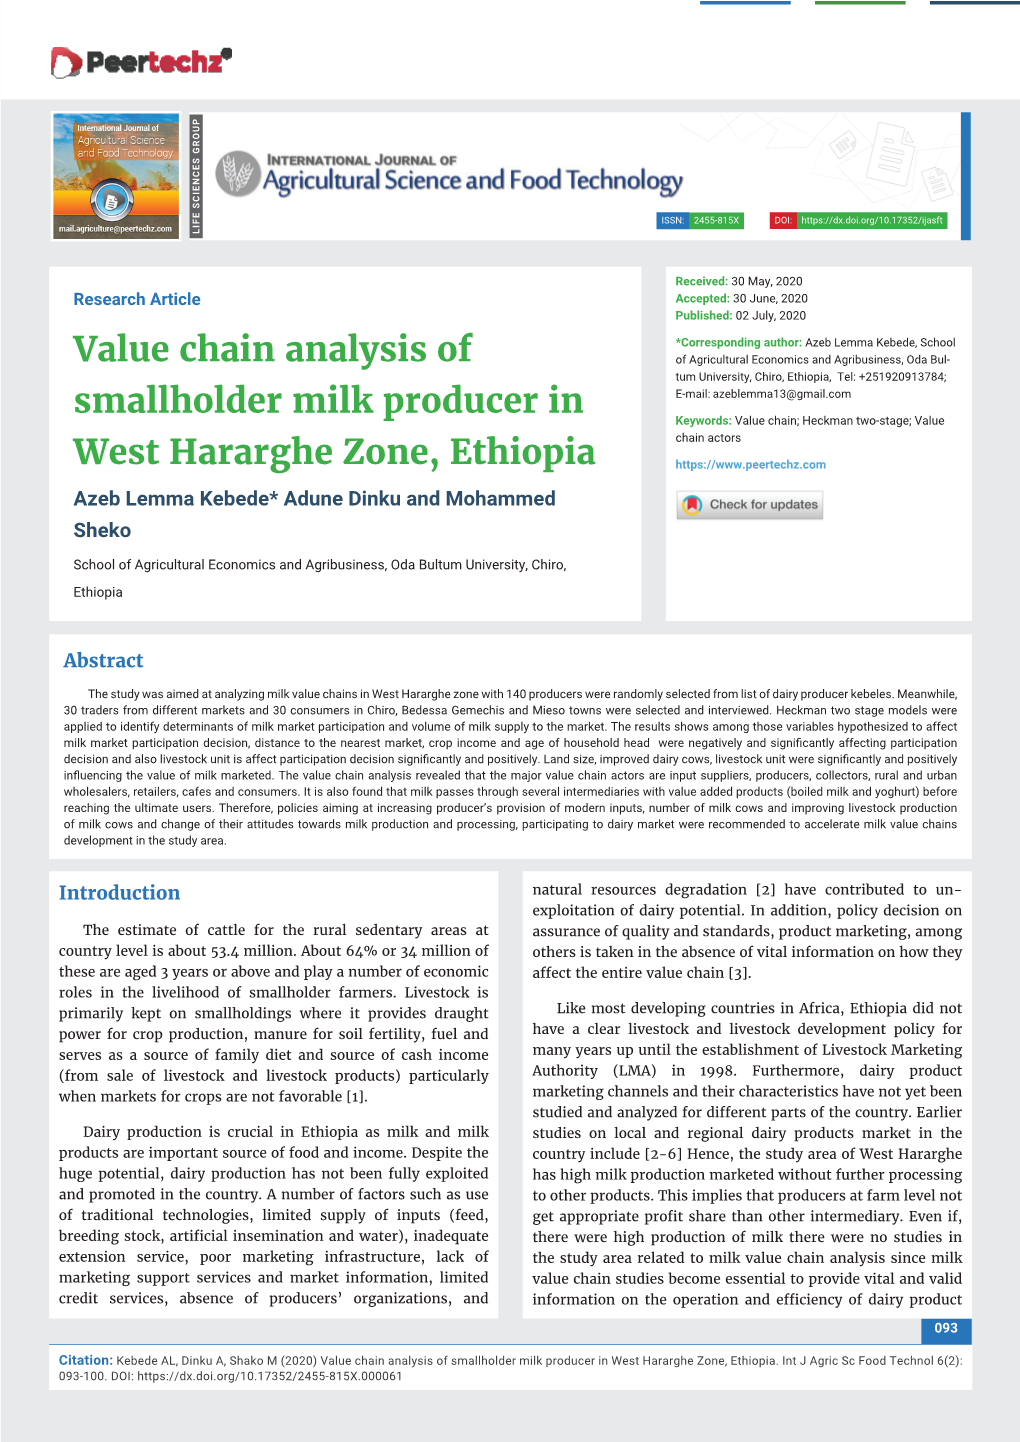 Value Chain Analysis of Smallholder Milk Producer in West Hararghe Zone, Ethiopia